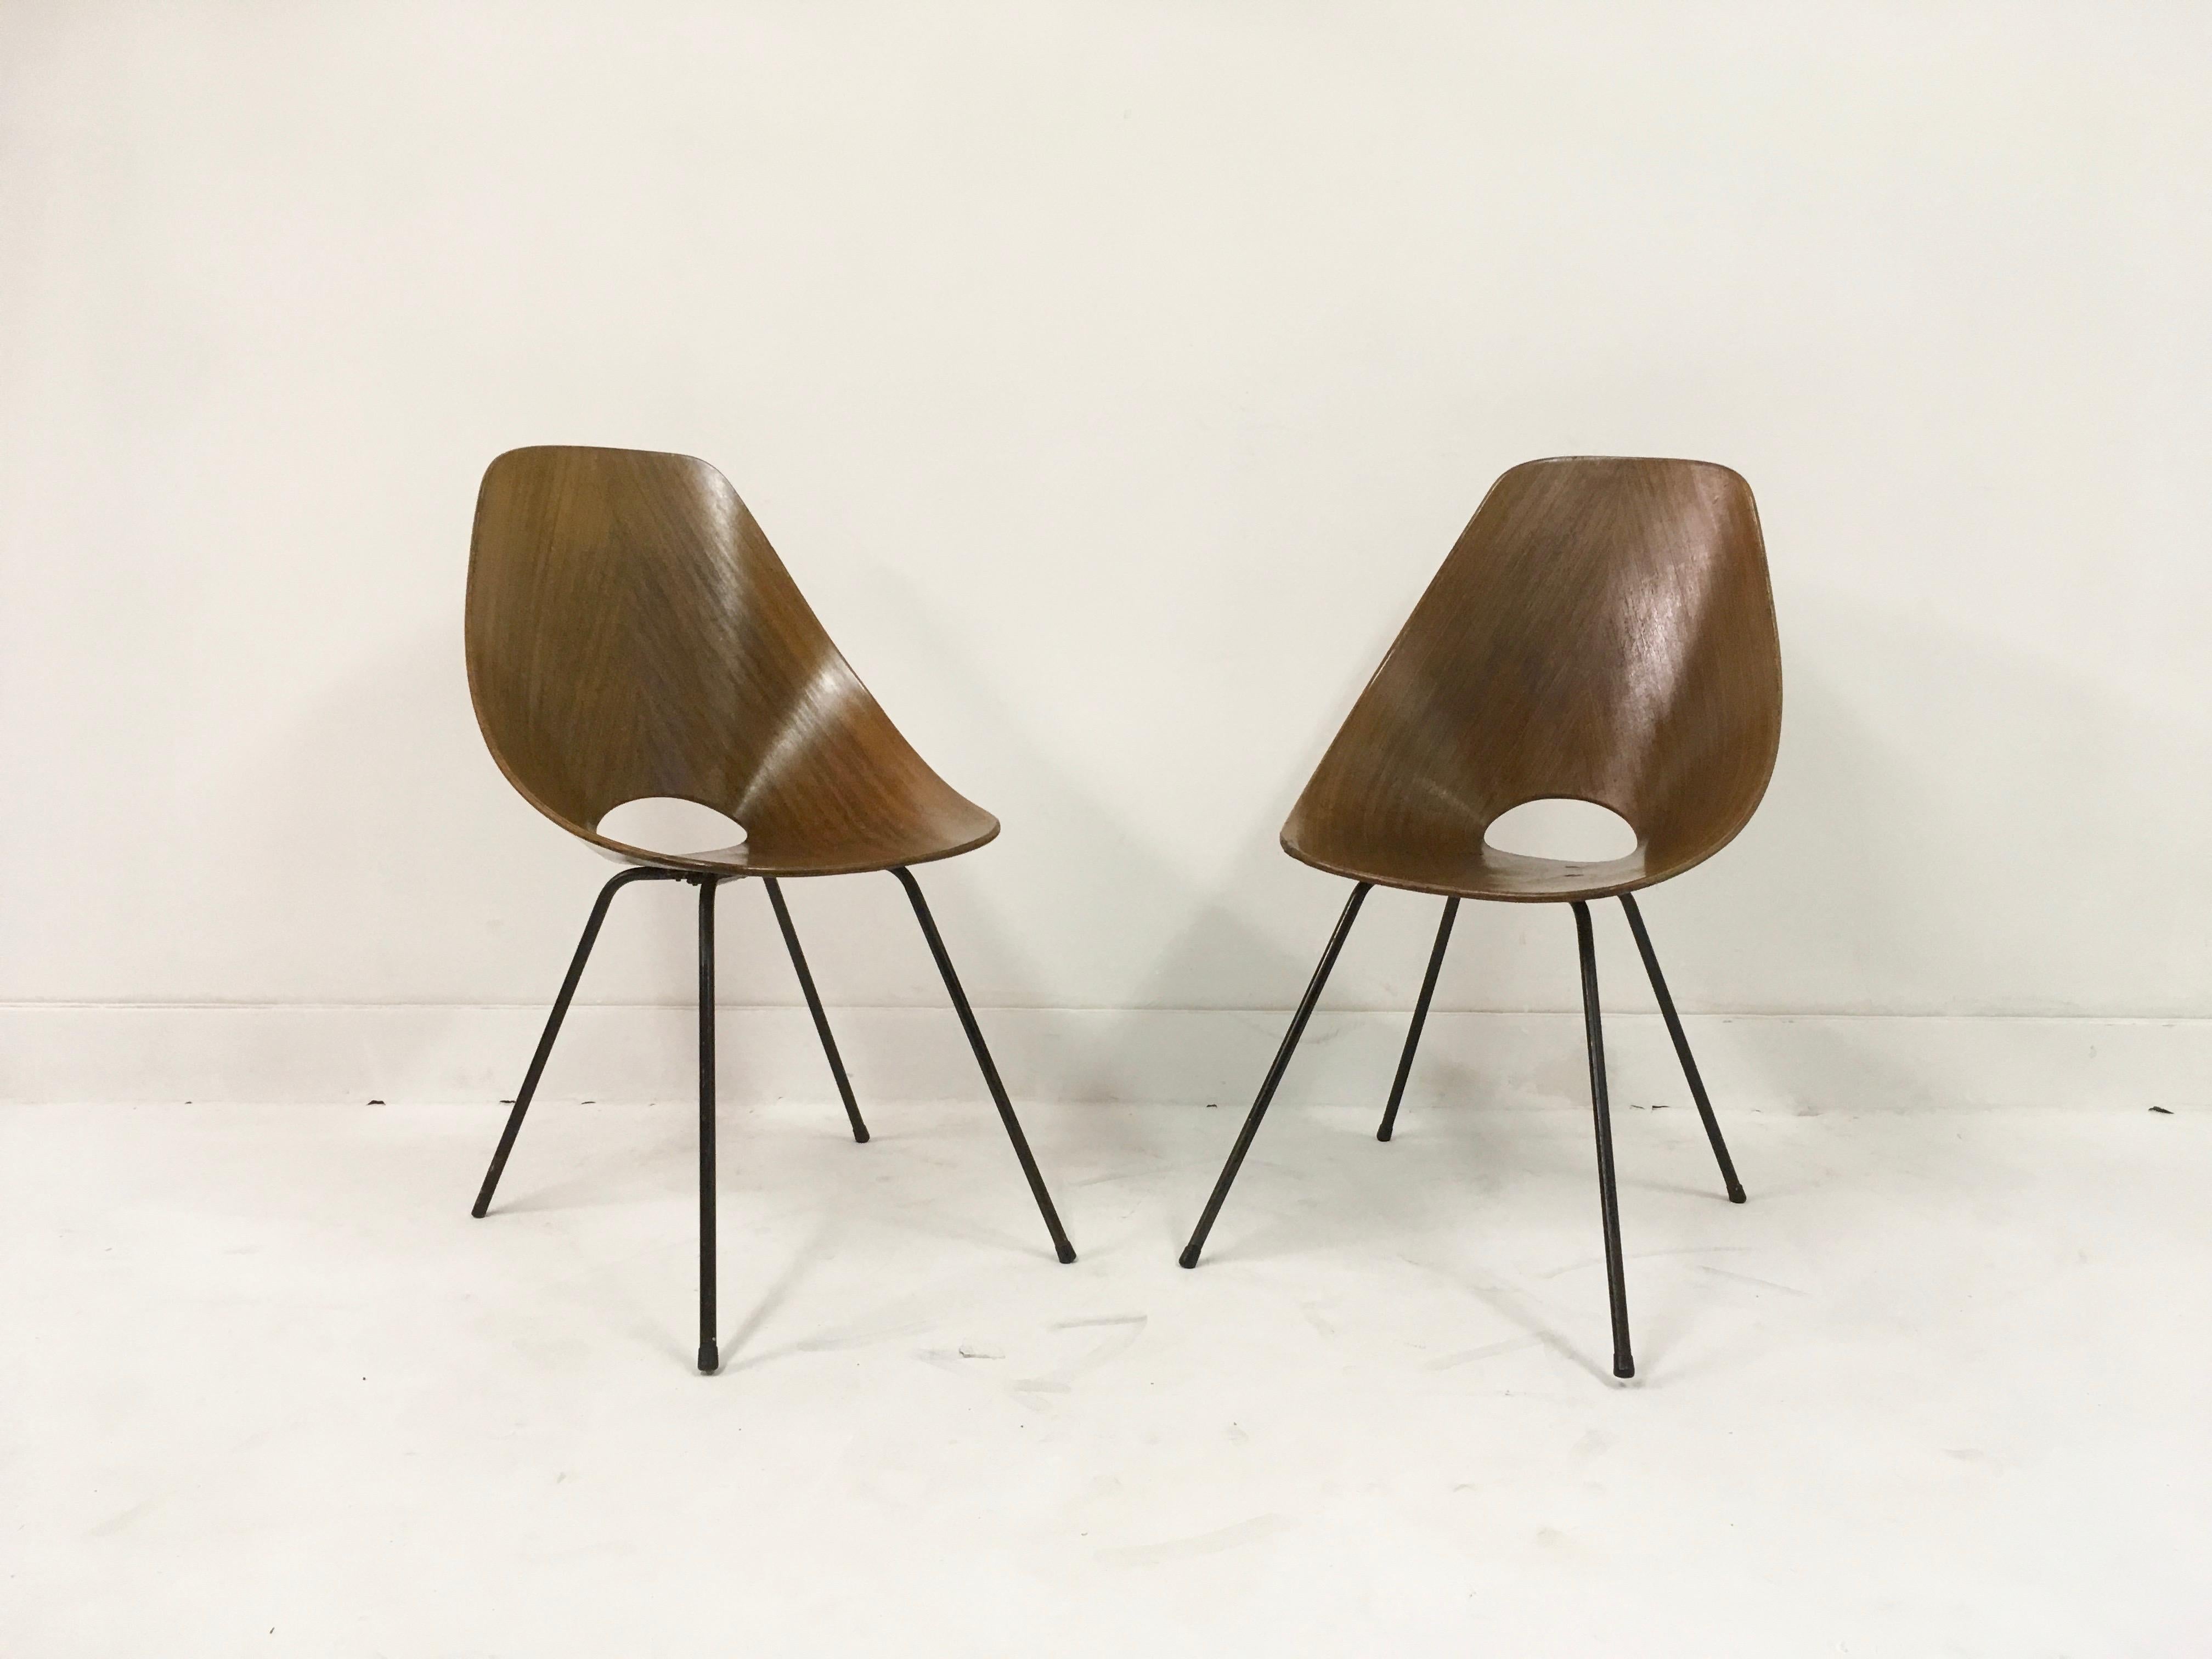 A pair of Medea chairs

By Vittorio Nobili

Bent teak plywood

Metal legs

1950s-1960s

Italy

Measures: Seat height 40cm.